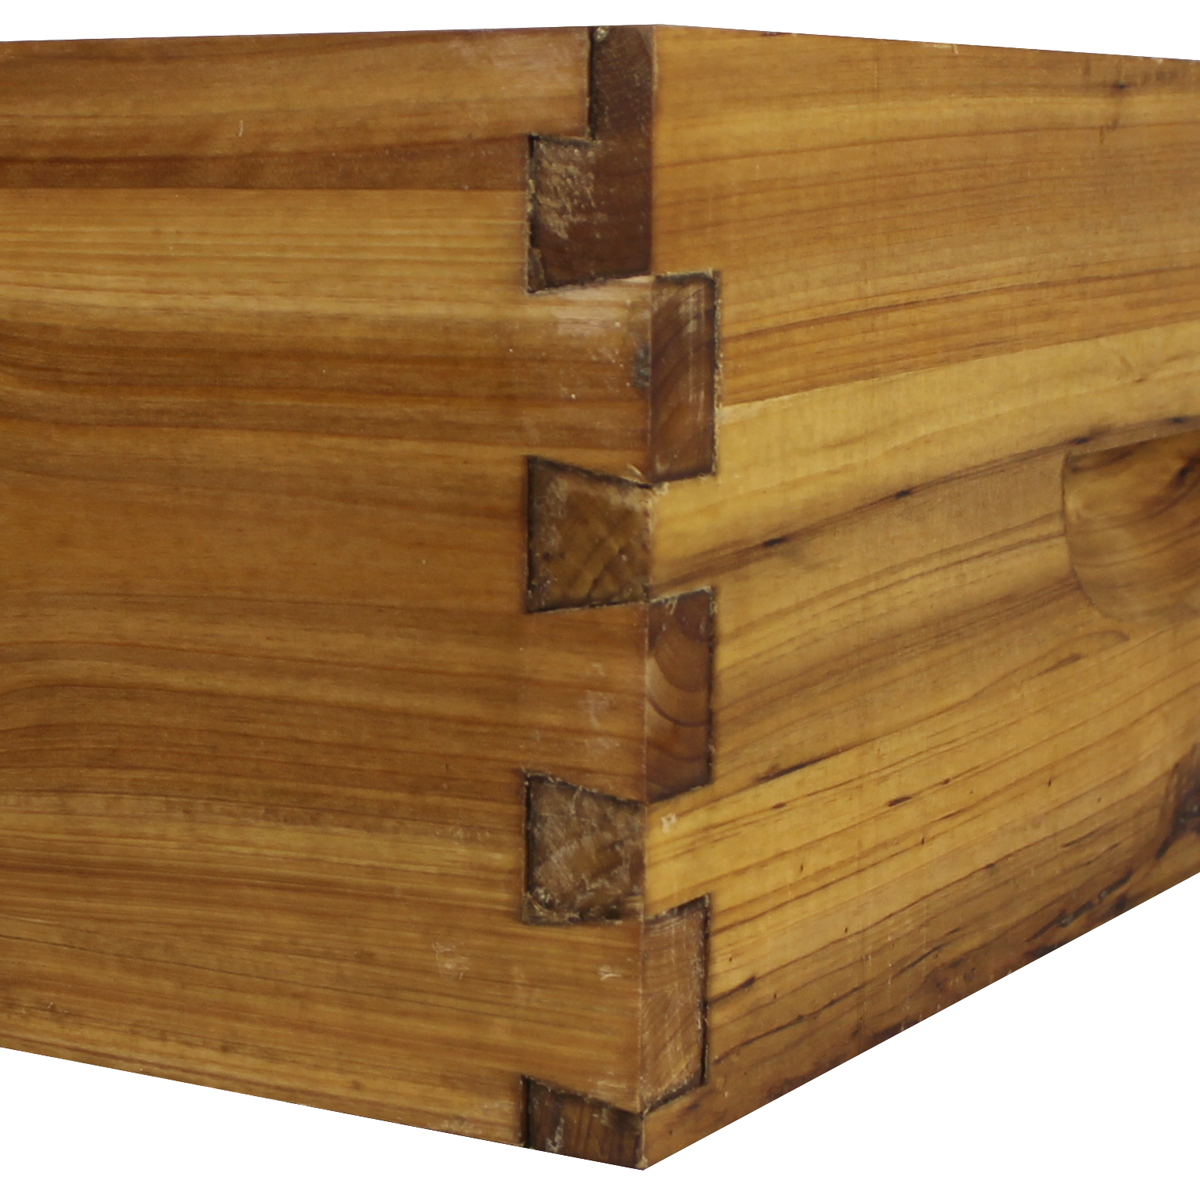 Hoover Hives Wax Coated 10 Frame Medium Bee Box Has Dovetails in Every Joint